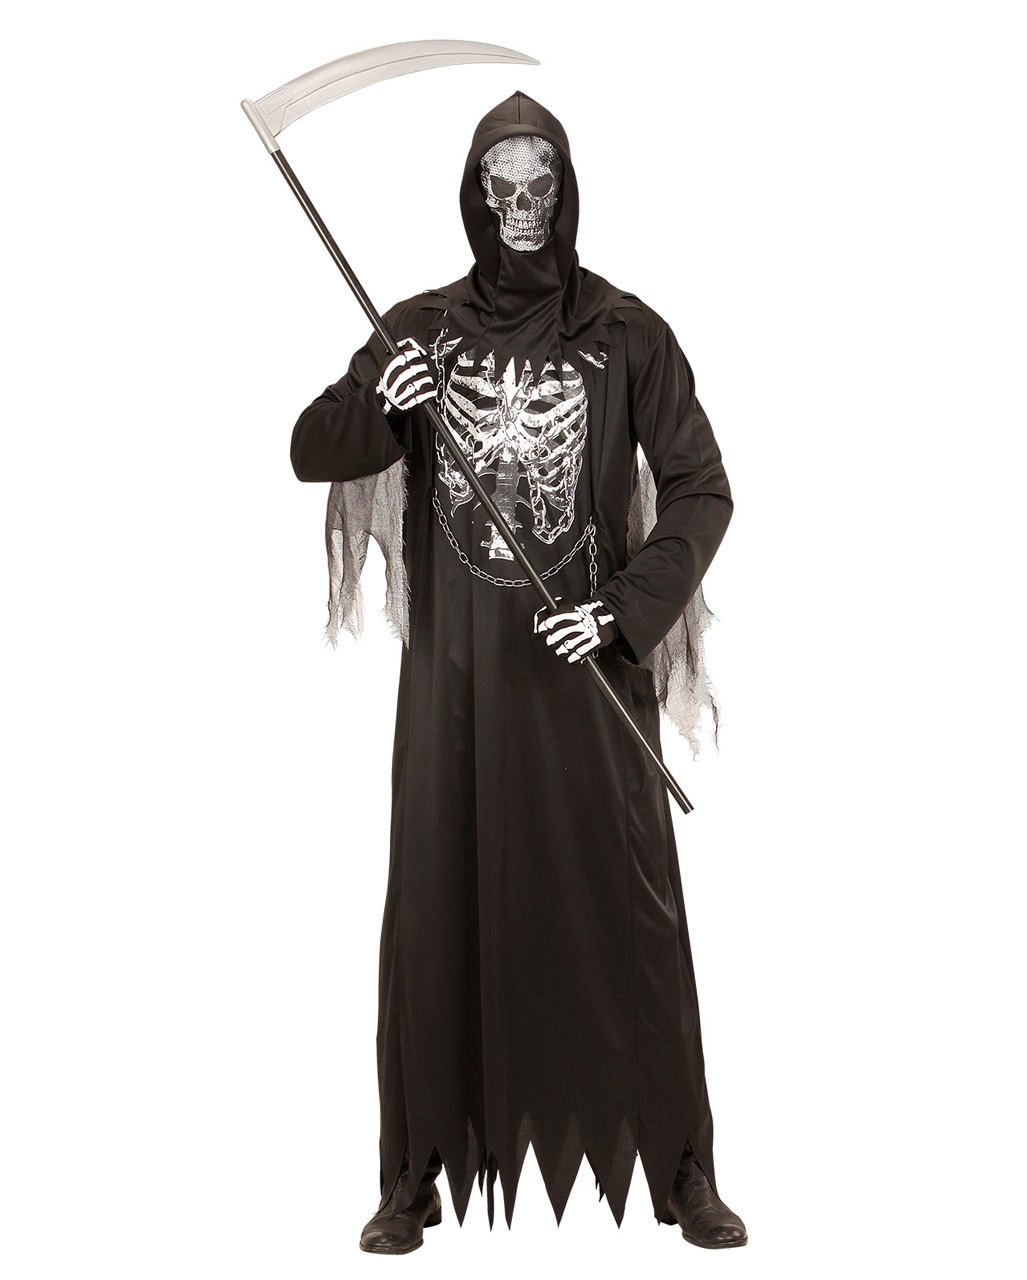 Grim Reaper Robe With Chain Adult Costume S for 🎃 | horror-shop.com